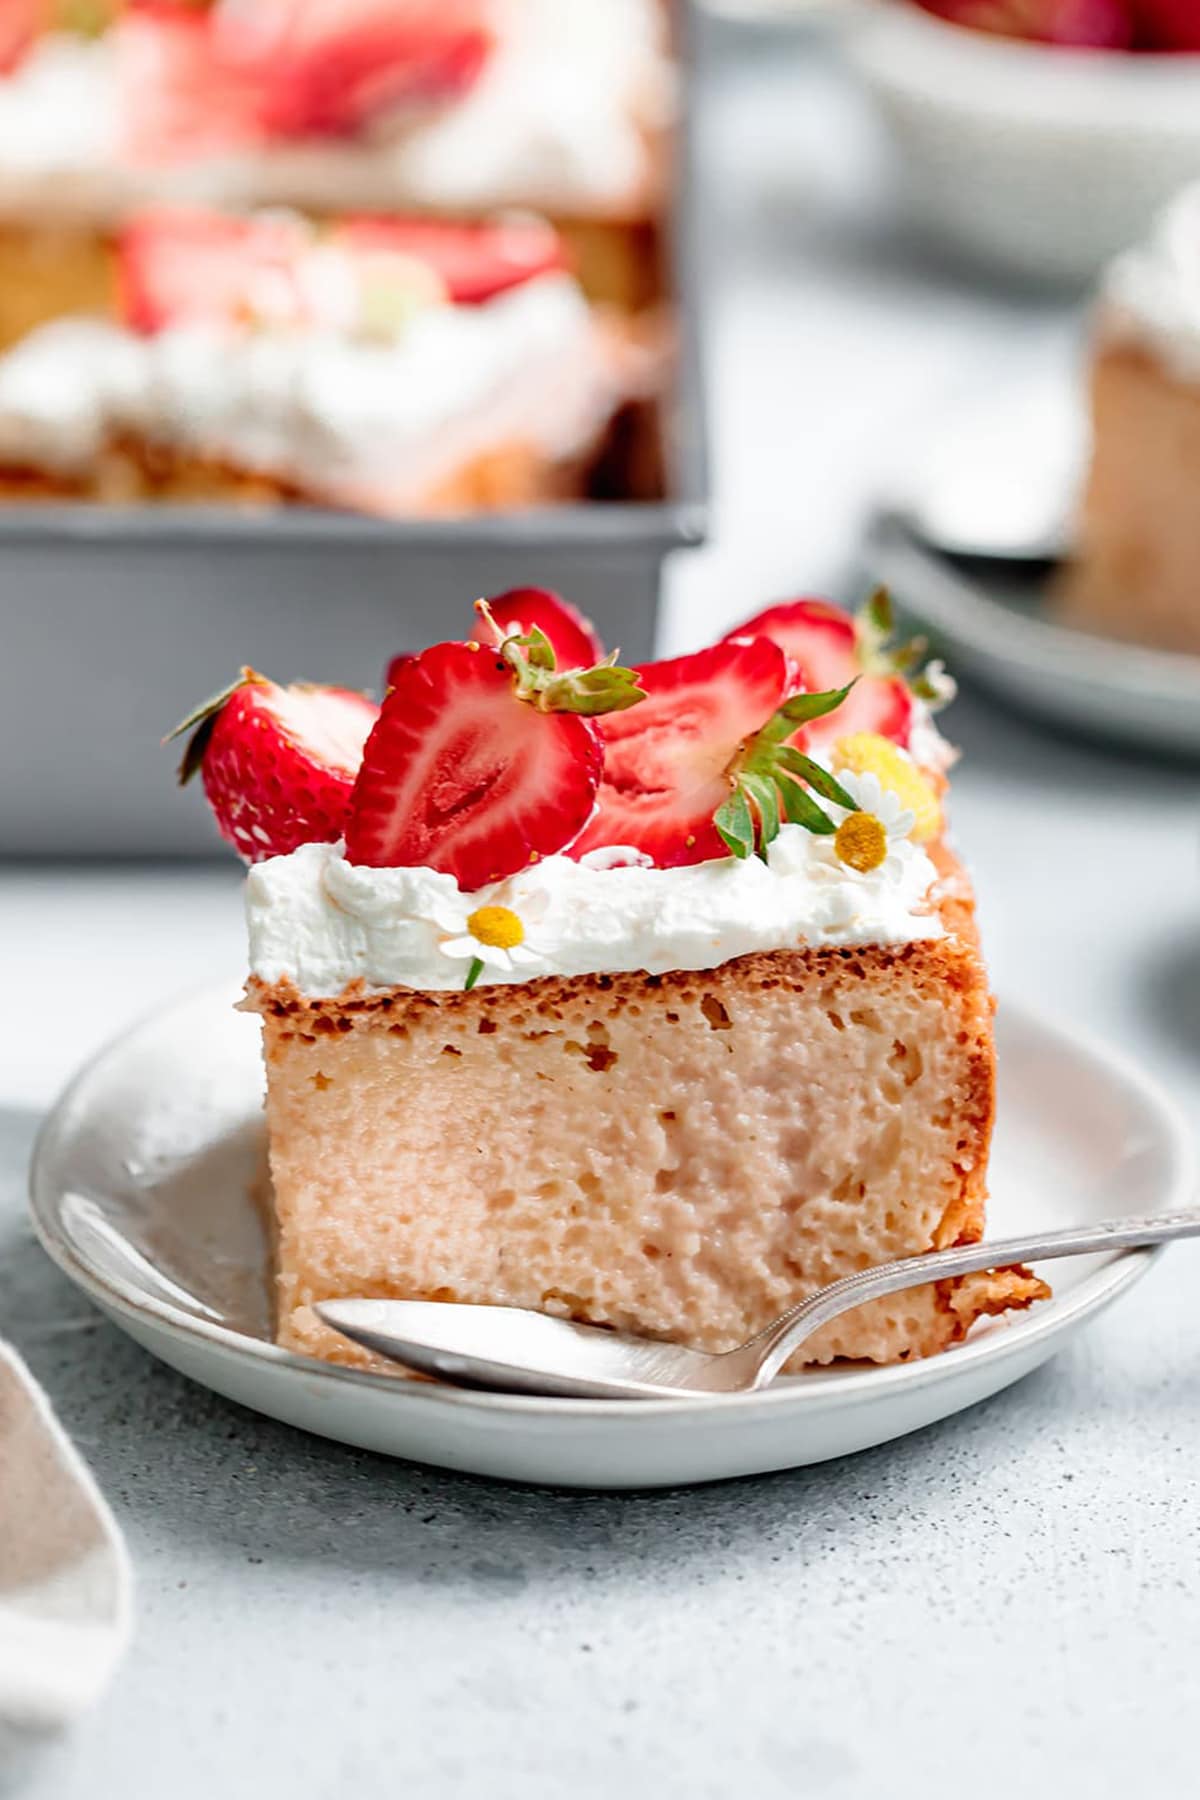 Strawberry Tres Leches cake slice, topped with whipped cream and sliced strawberries.